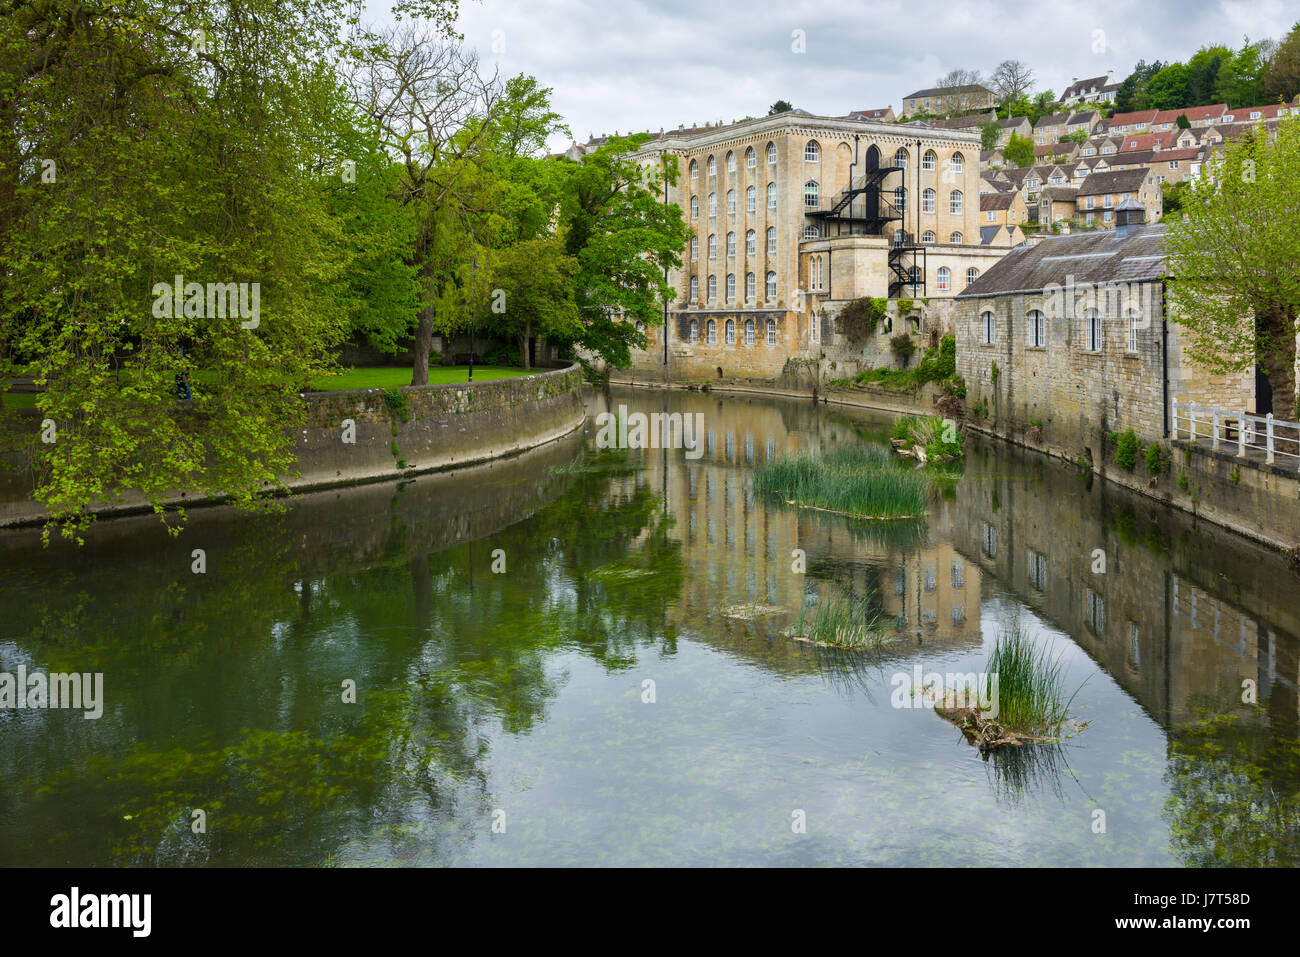 The River Avon and Abbey Mill in Bradford on Avon, Wiltshire, England. Stock Photo